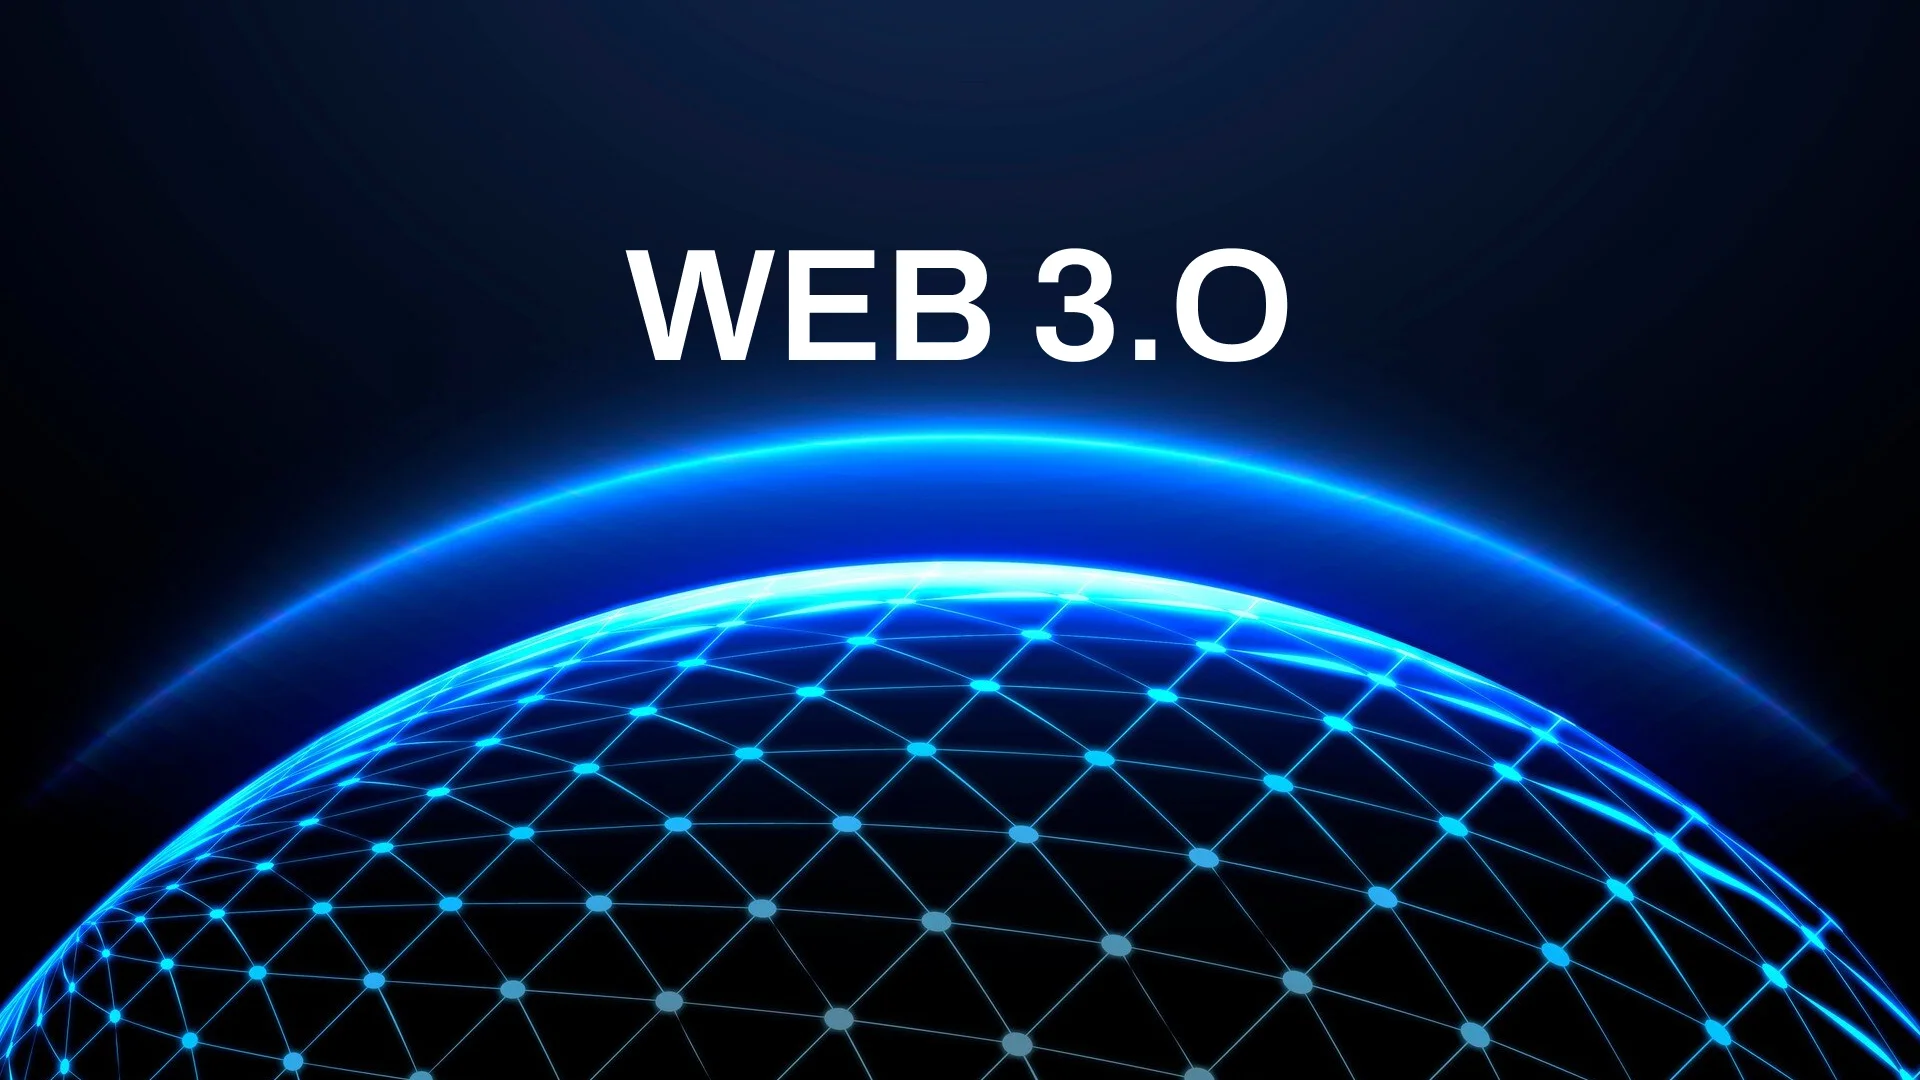 Web 3.0 - everything you need to know About